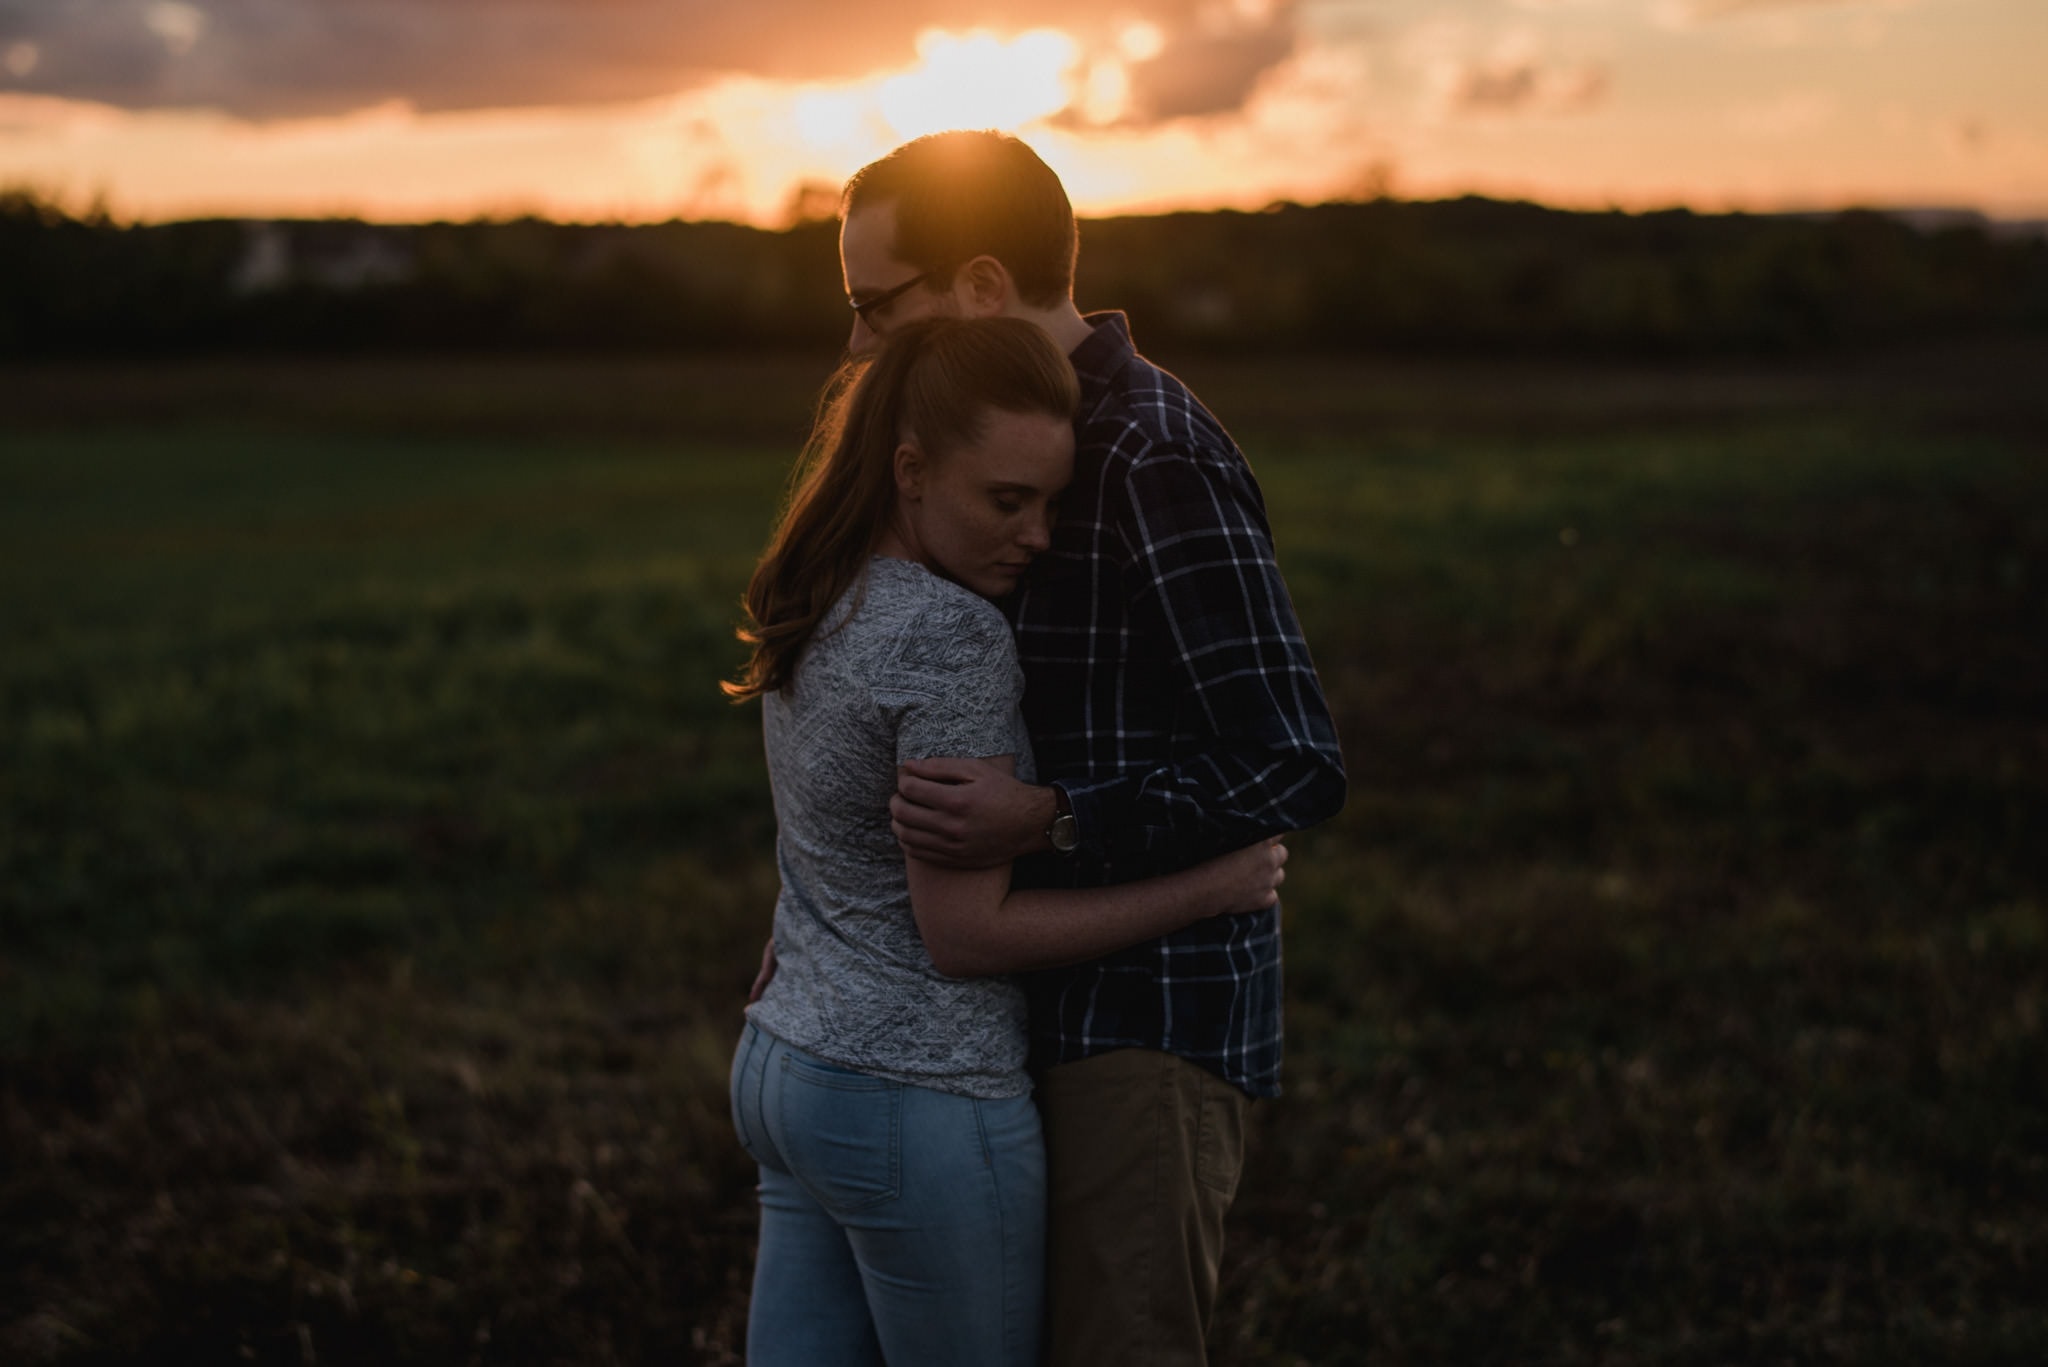 Erica+Rob’s Upstate NY Couples Session